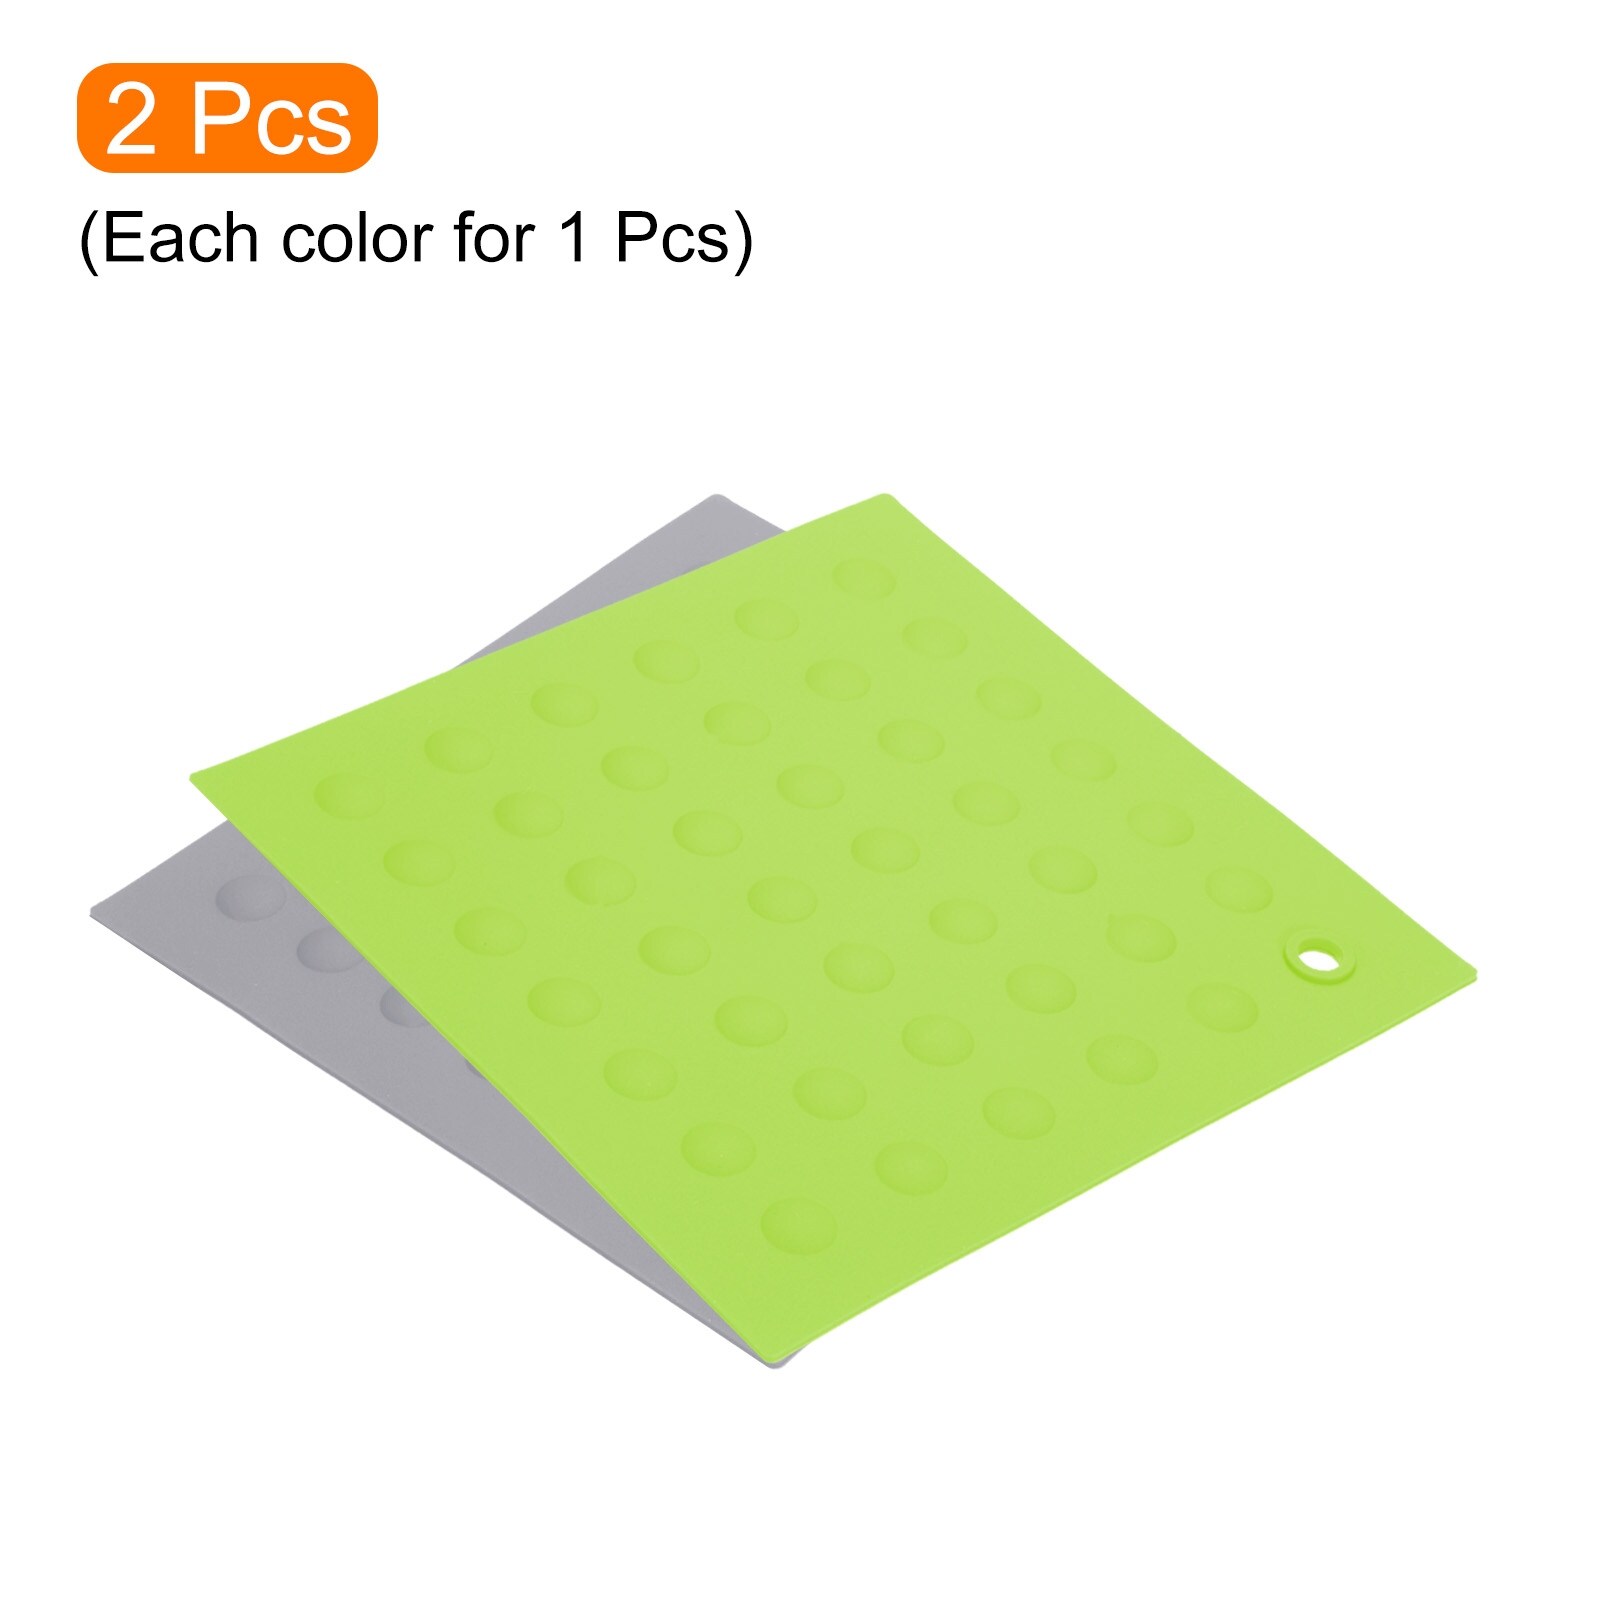 https://ak1.ostkcdn.com/images/products/is/images/direct/69af1ce88de768c6345a5a55bea20fbed3407fa8/Silicone-Trivet-Mats-2pcs%2C-Square-Dots-Dish-Drying-Mat---Light-Gray%2C-Green.jpg